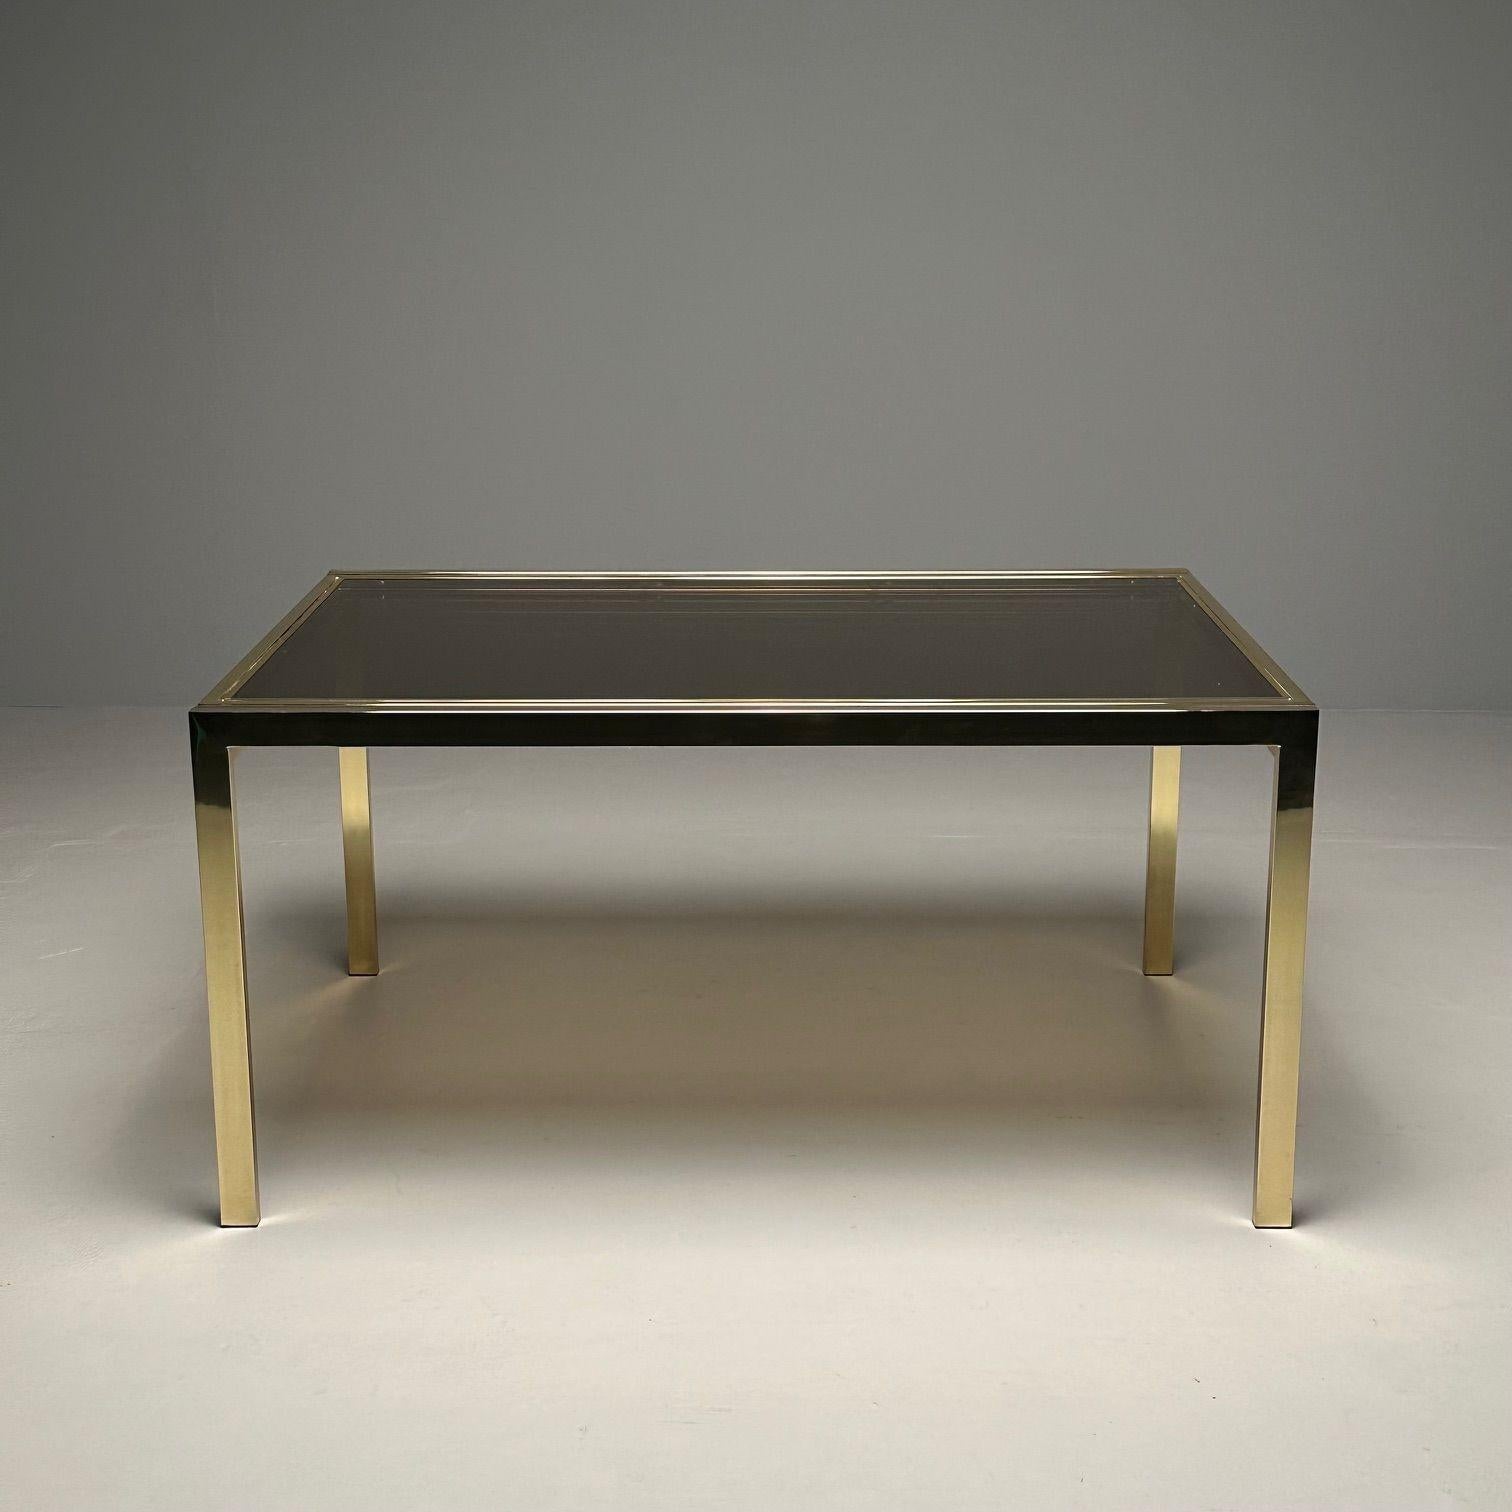 Mid-Century Modern Milo Baughman Dining Table, Expandable, Smoked Glass and Metal

Designed by Milo Baughman for Design Institute of America 'Hidden Pull out Leaf' Dining Table. Sixty inches wide with two pull out, easy sliding, table leaves that